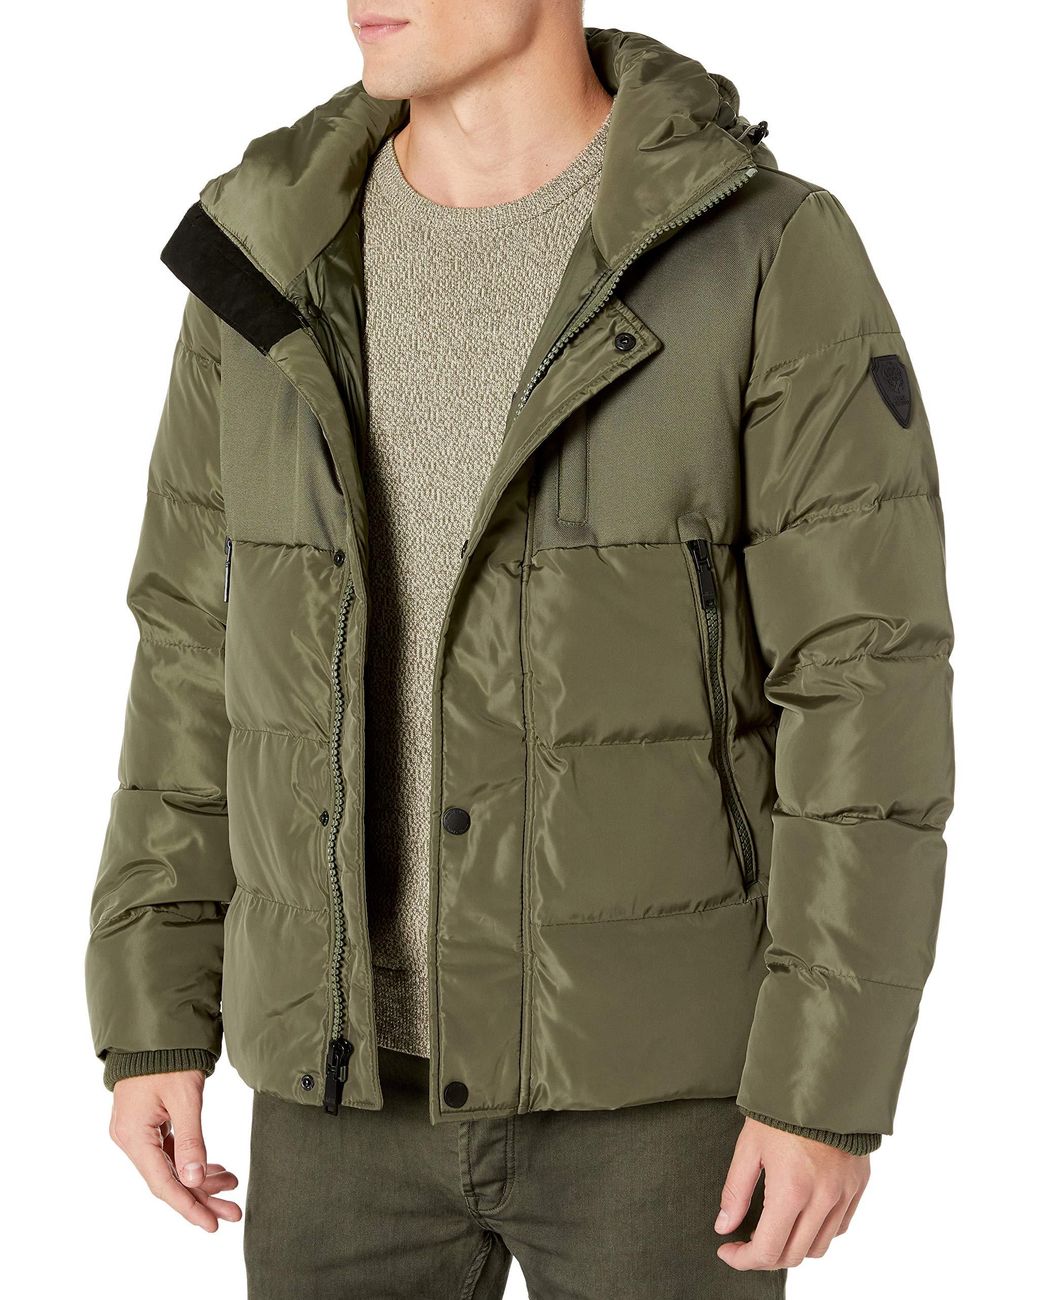 Vince Camuto Hooded Down Puffer Jacket in Olive (Green) for Men - Lyst